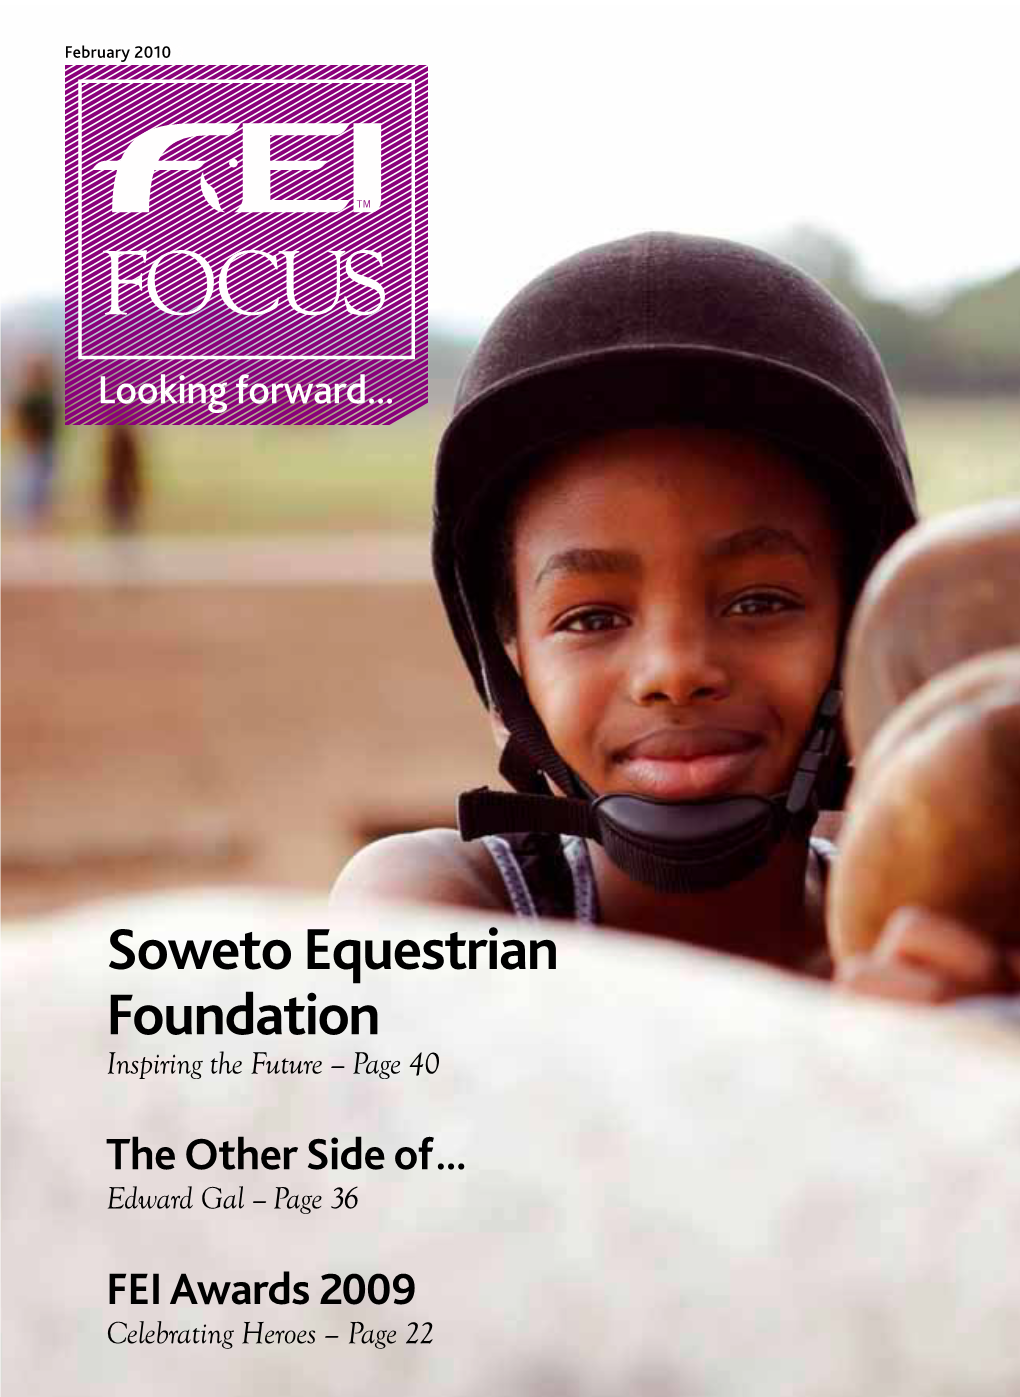 Soweto Equestrian Foundation Inspiring the Future – Page 40